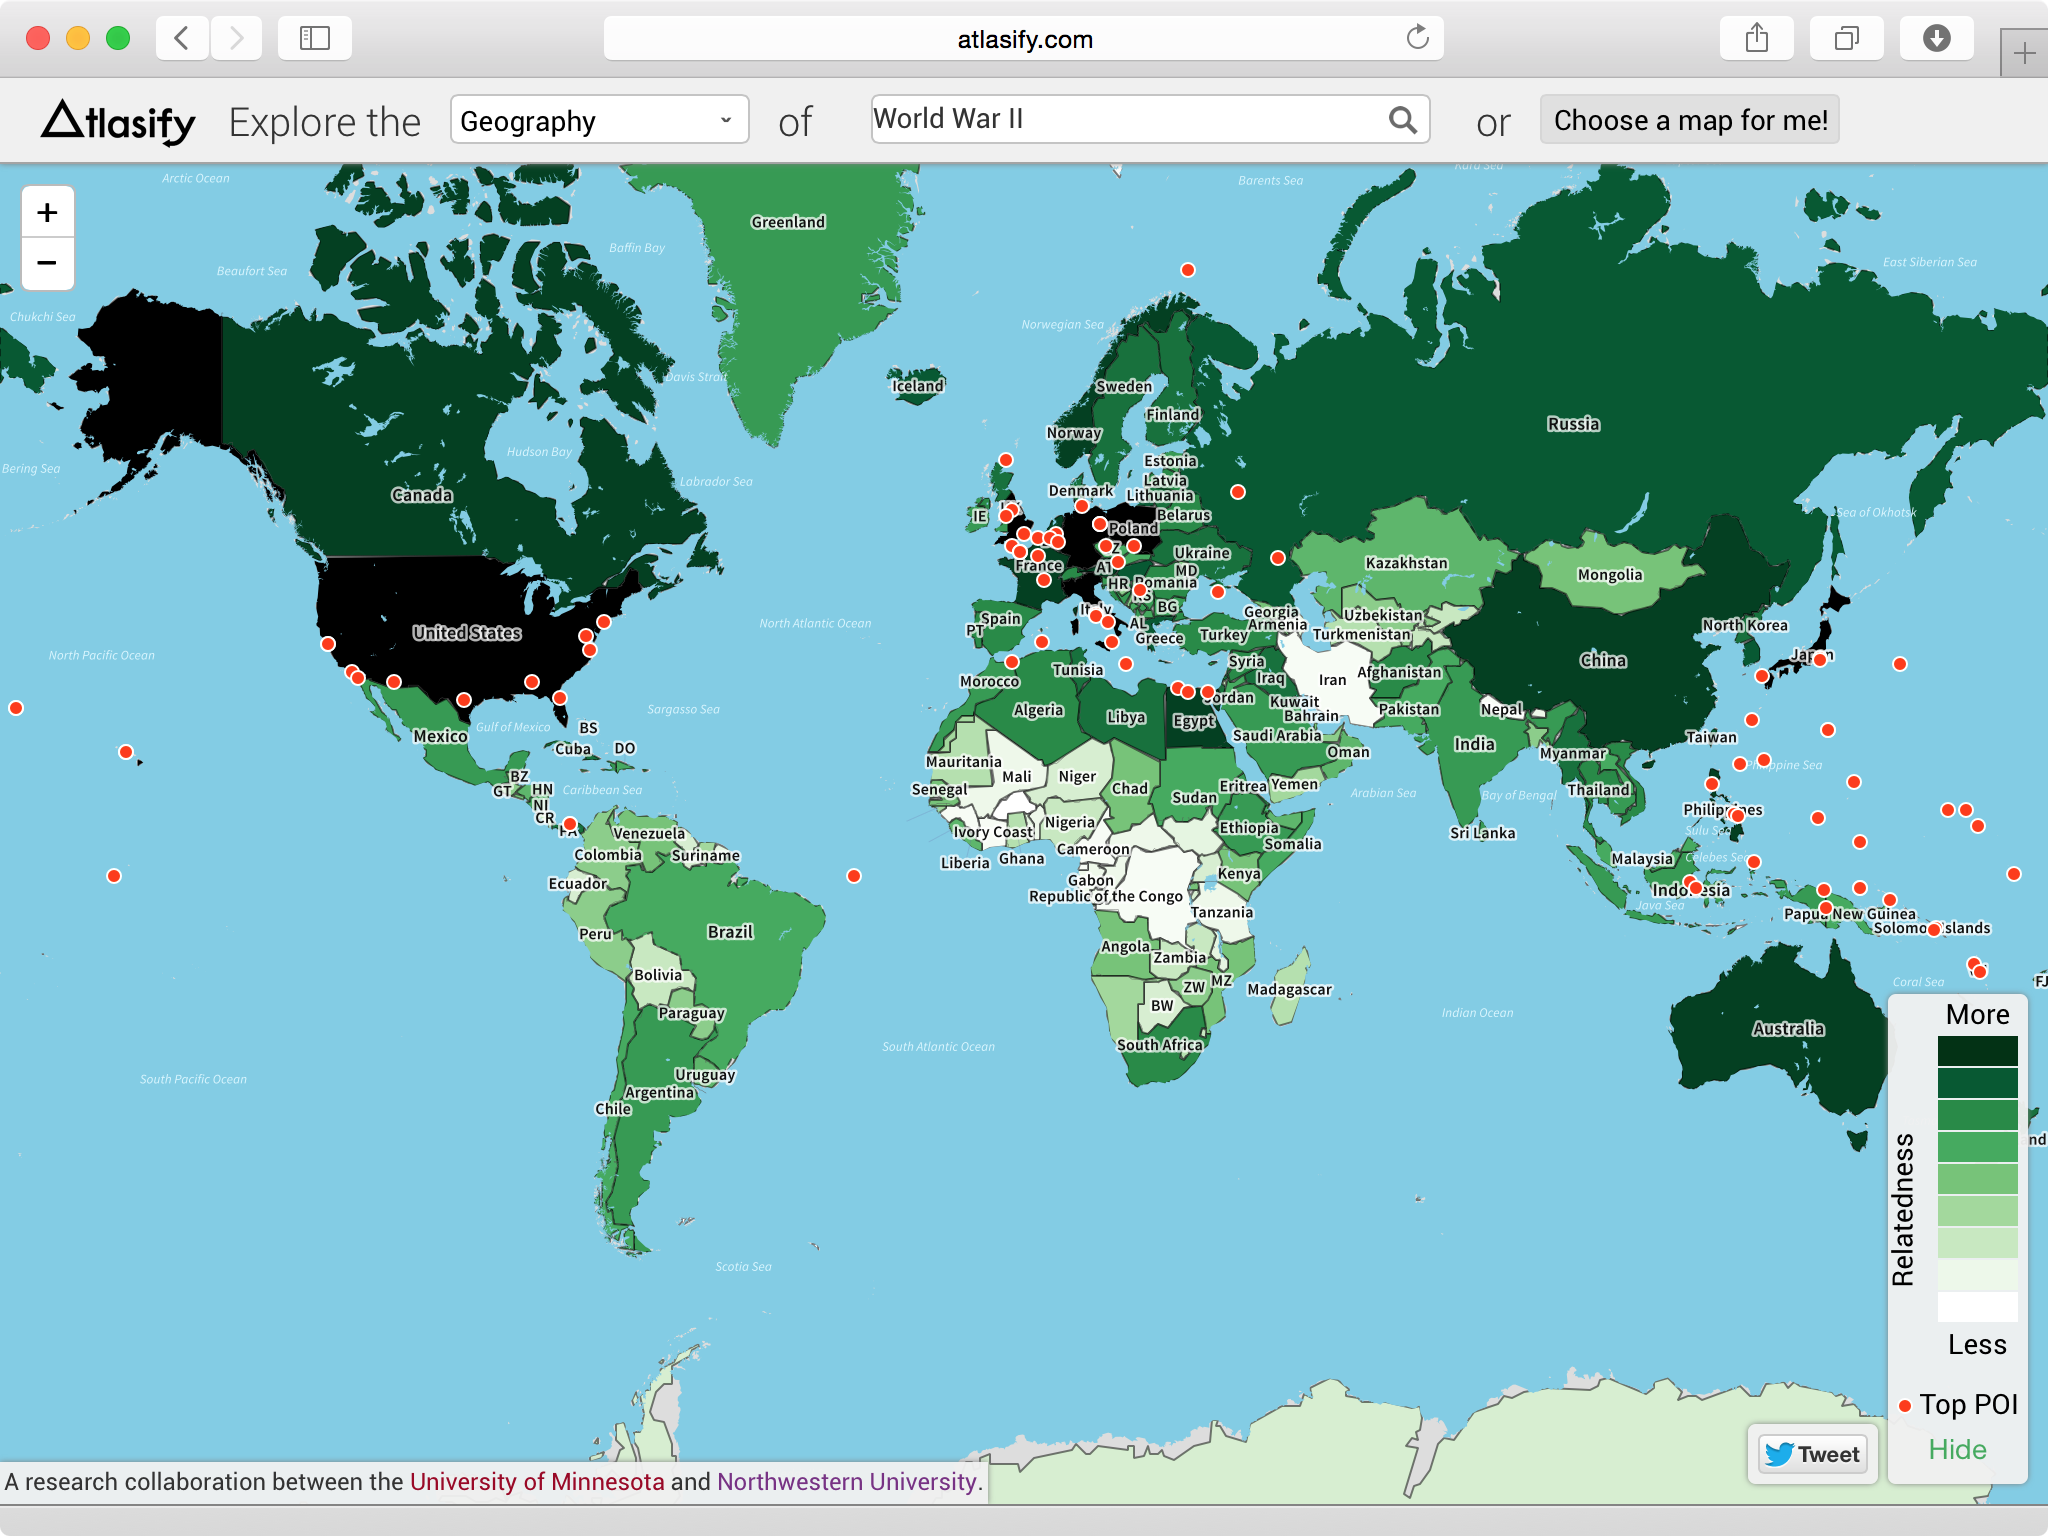 Atlasify's results for the query "World War II" on the world map reference system.